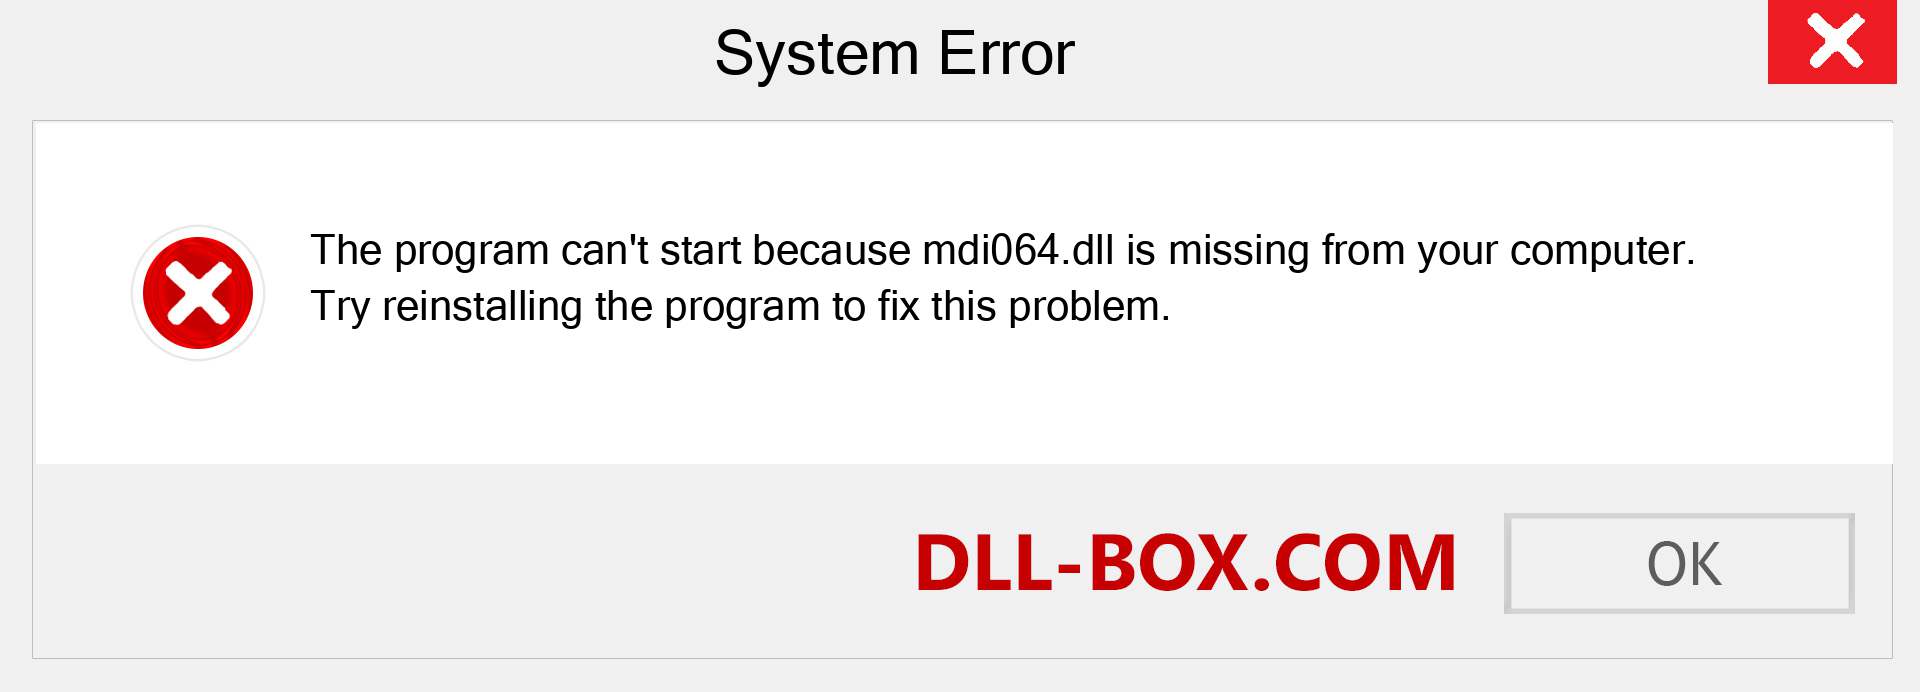  mdi064.dll file is missing?. Download for Windows 7, 8, 10 - Fix  mdi064 dll Missing Error on Windows, photos, images